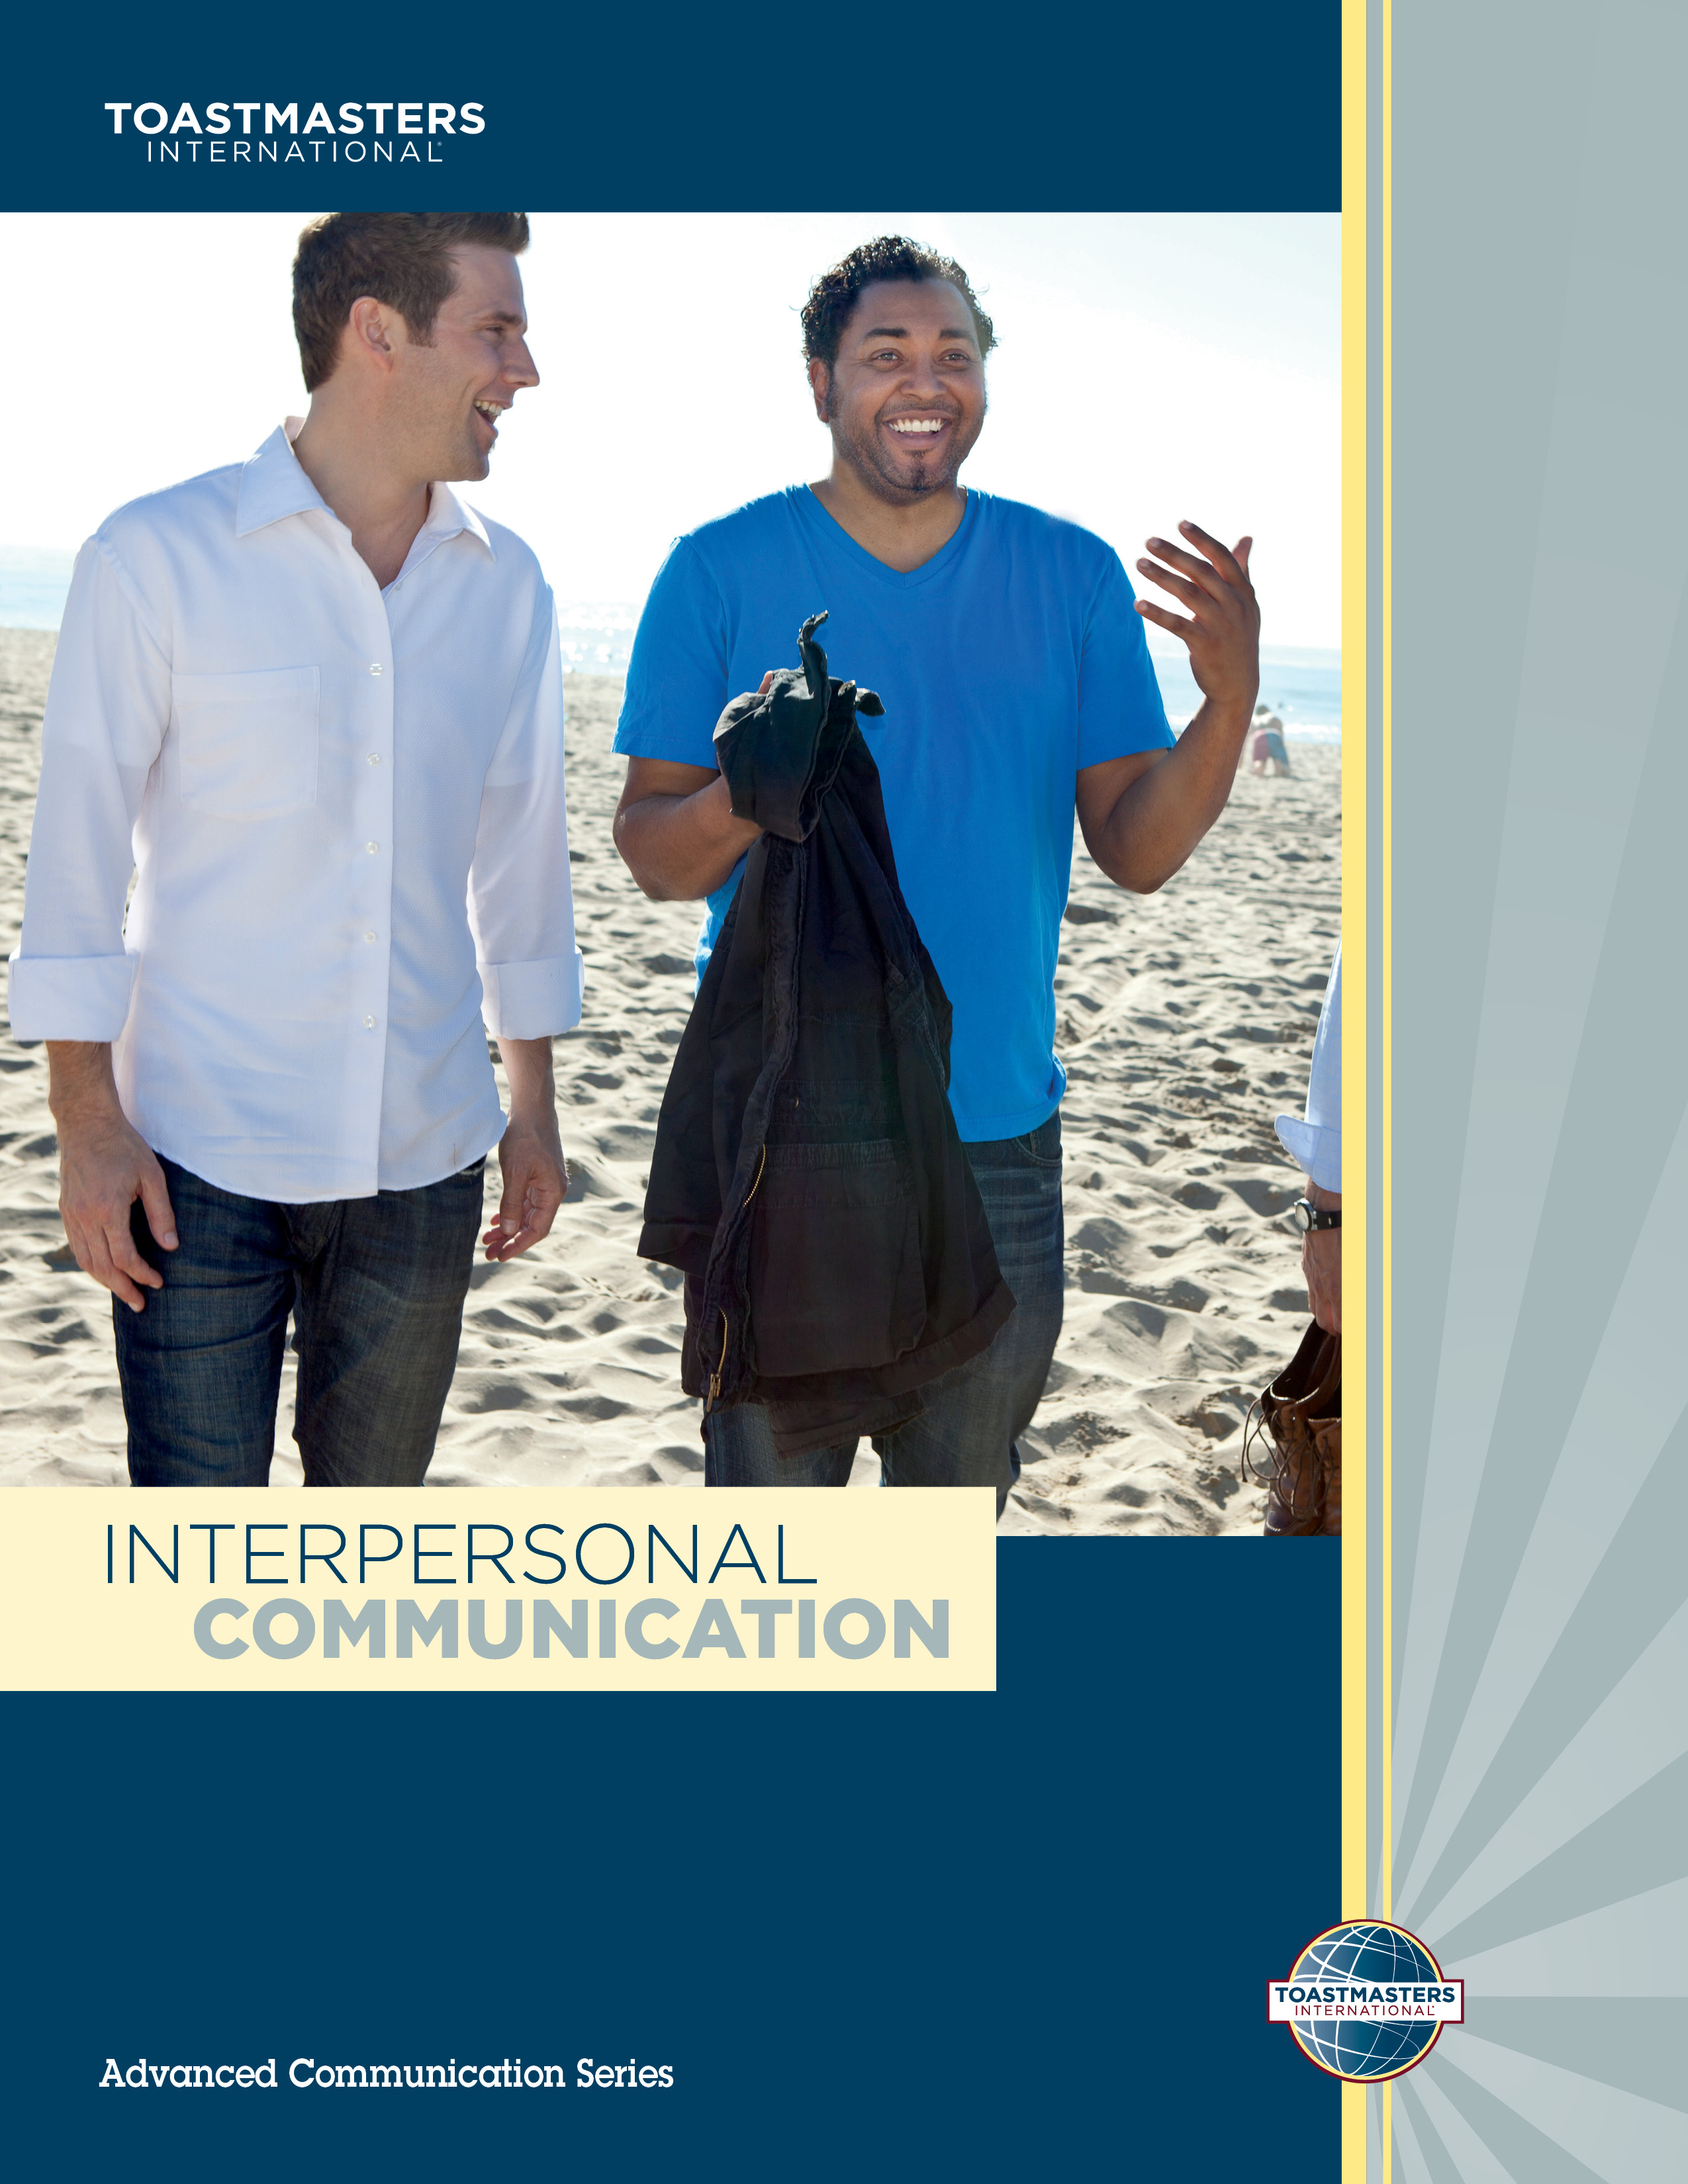 Cover of the "Interpersonal Communication" advanced manual